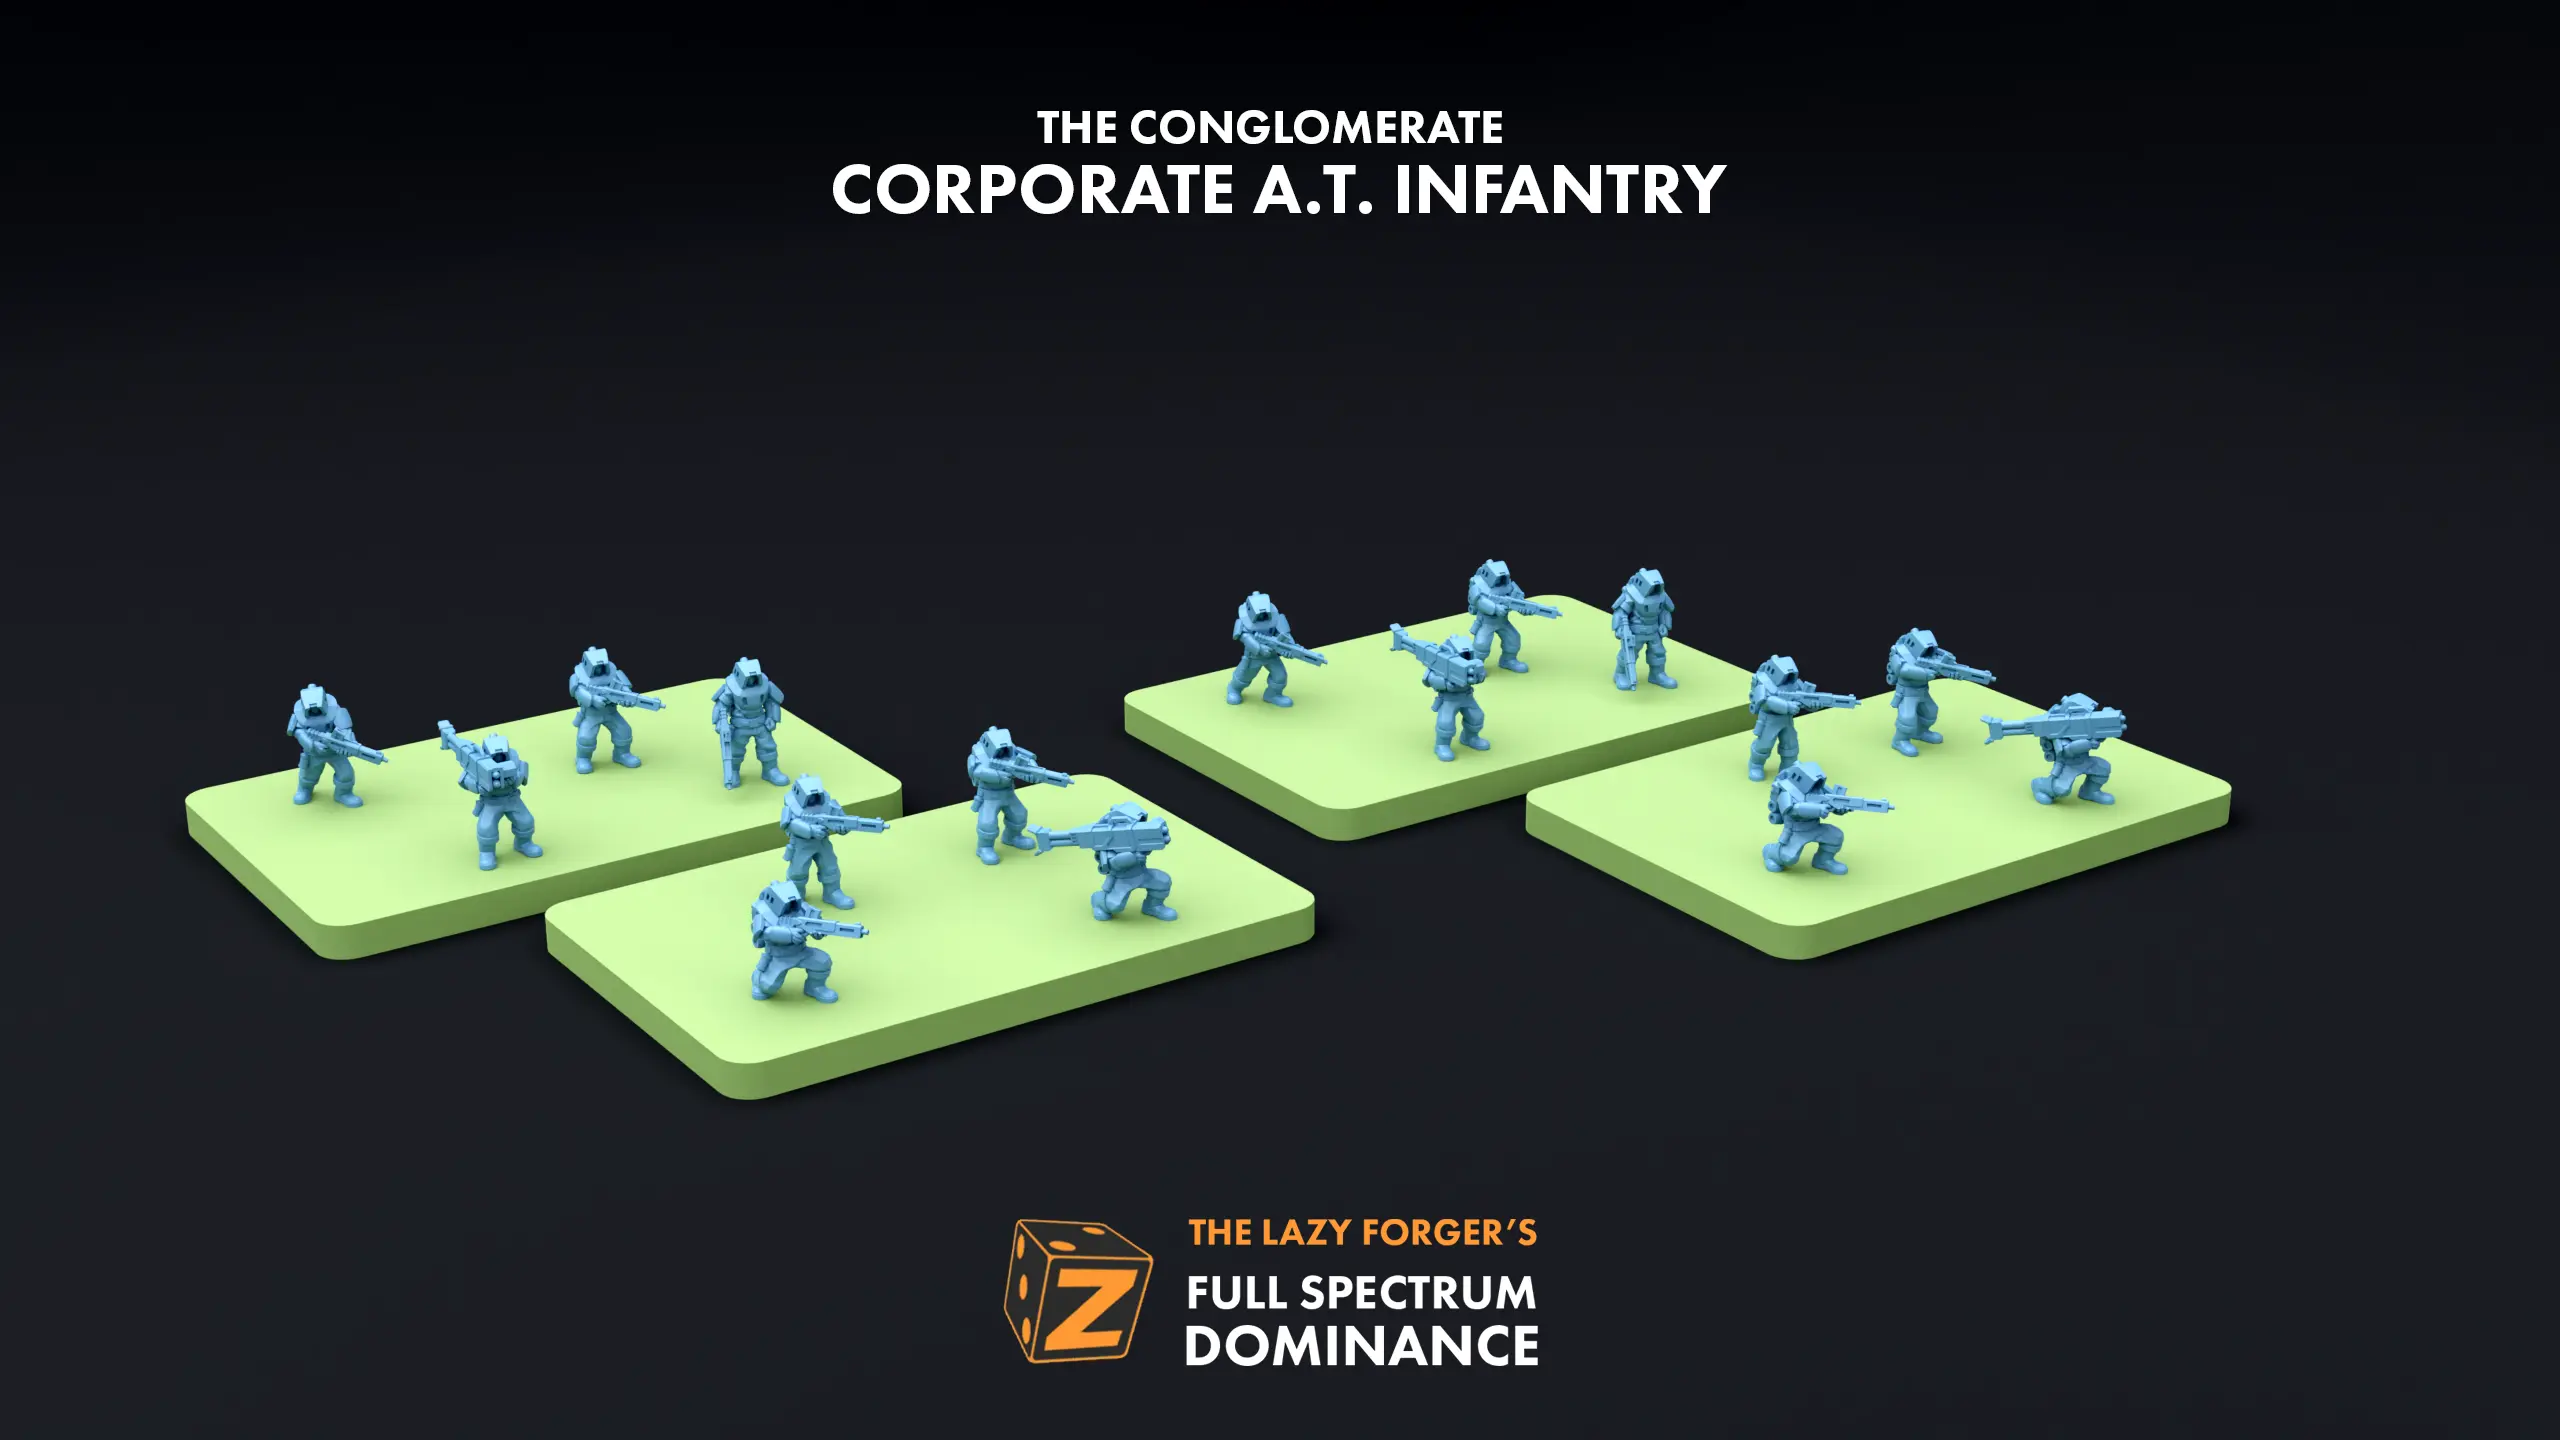 Corporate AT Infantry - The Conglomerate The Lazy Forger